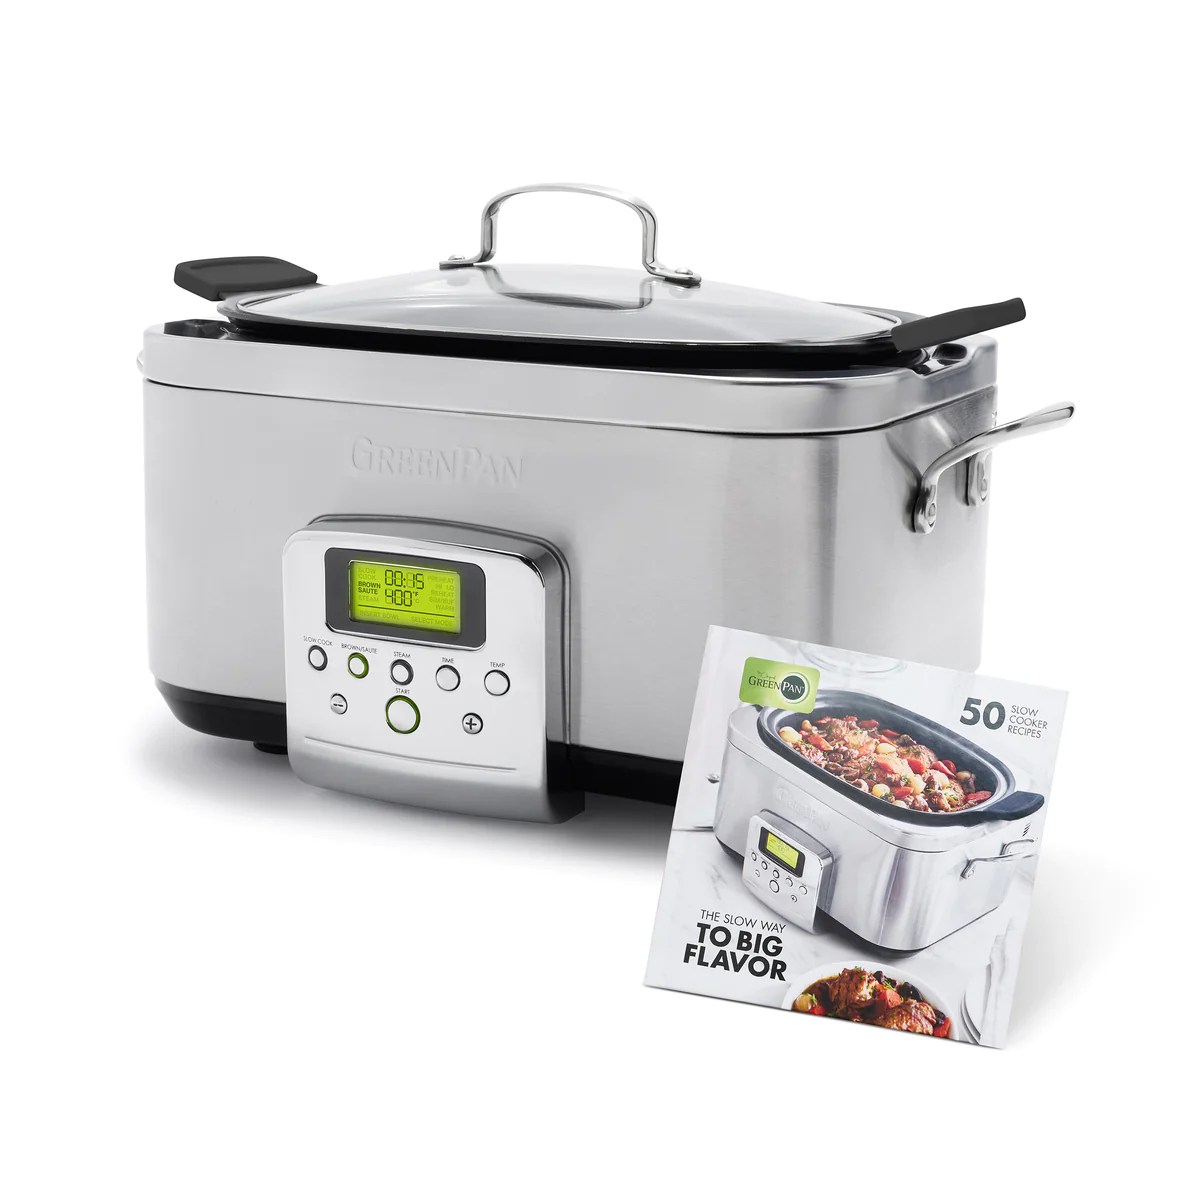 Crock-Pot's stainless steel 6-Quart Slow Cooker w/ Digital Timer drops to  $29 shipped